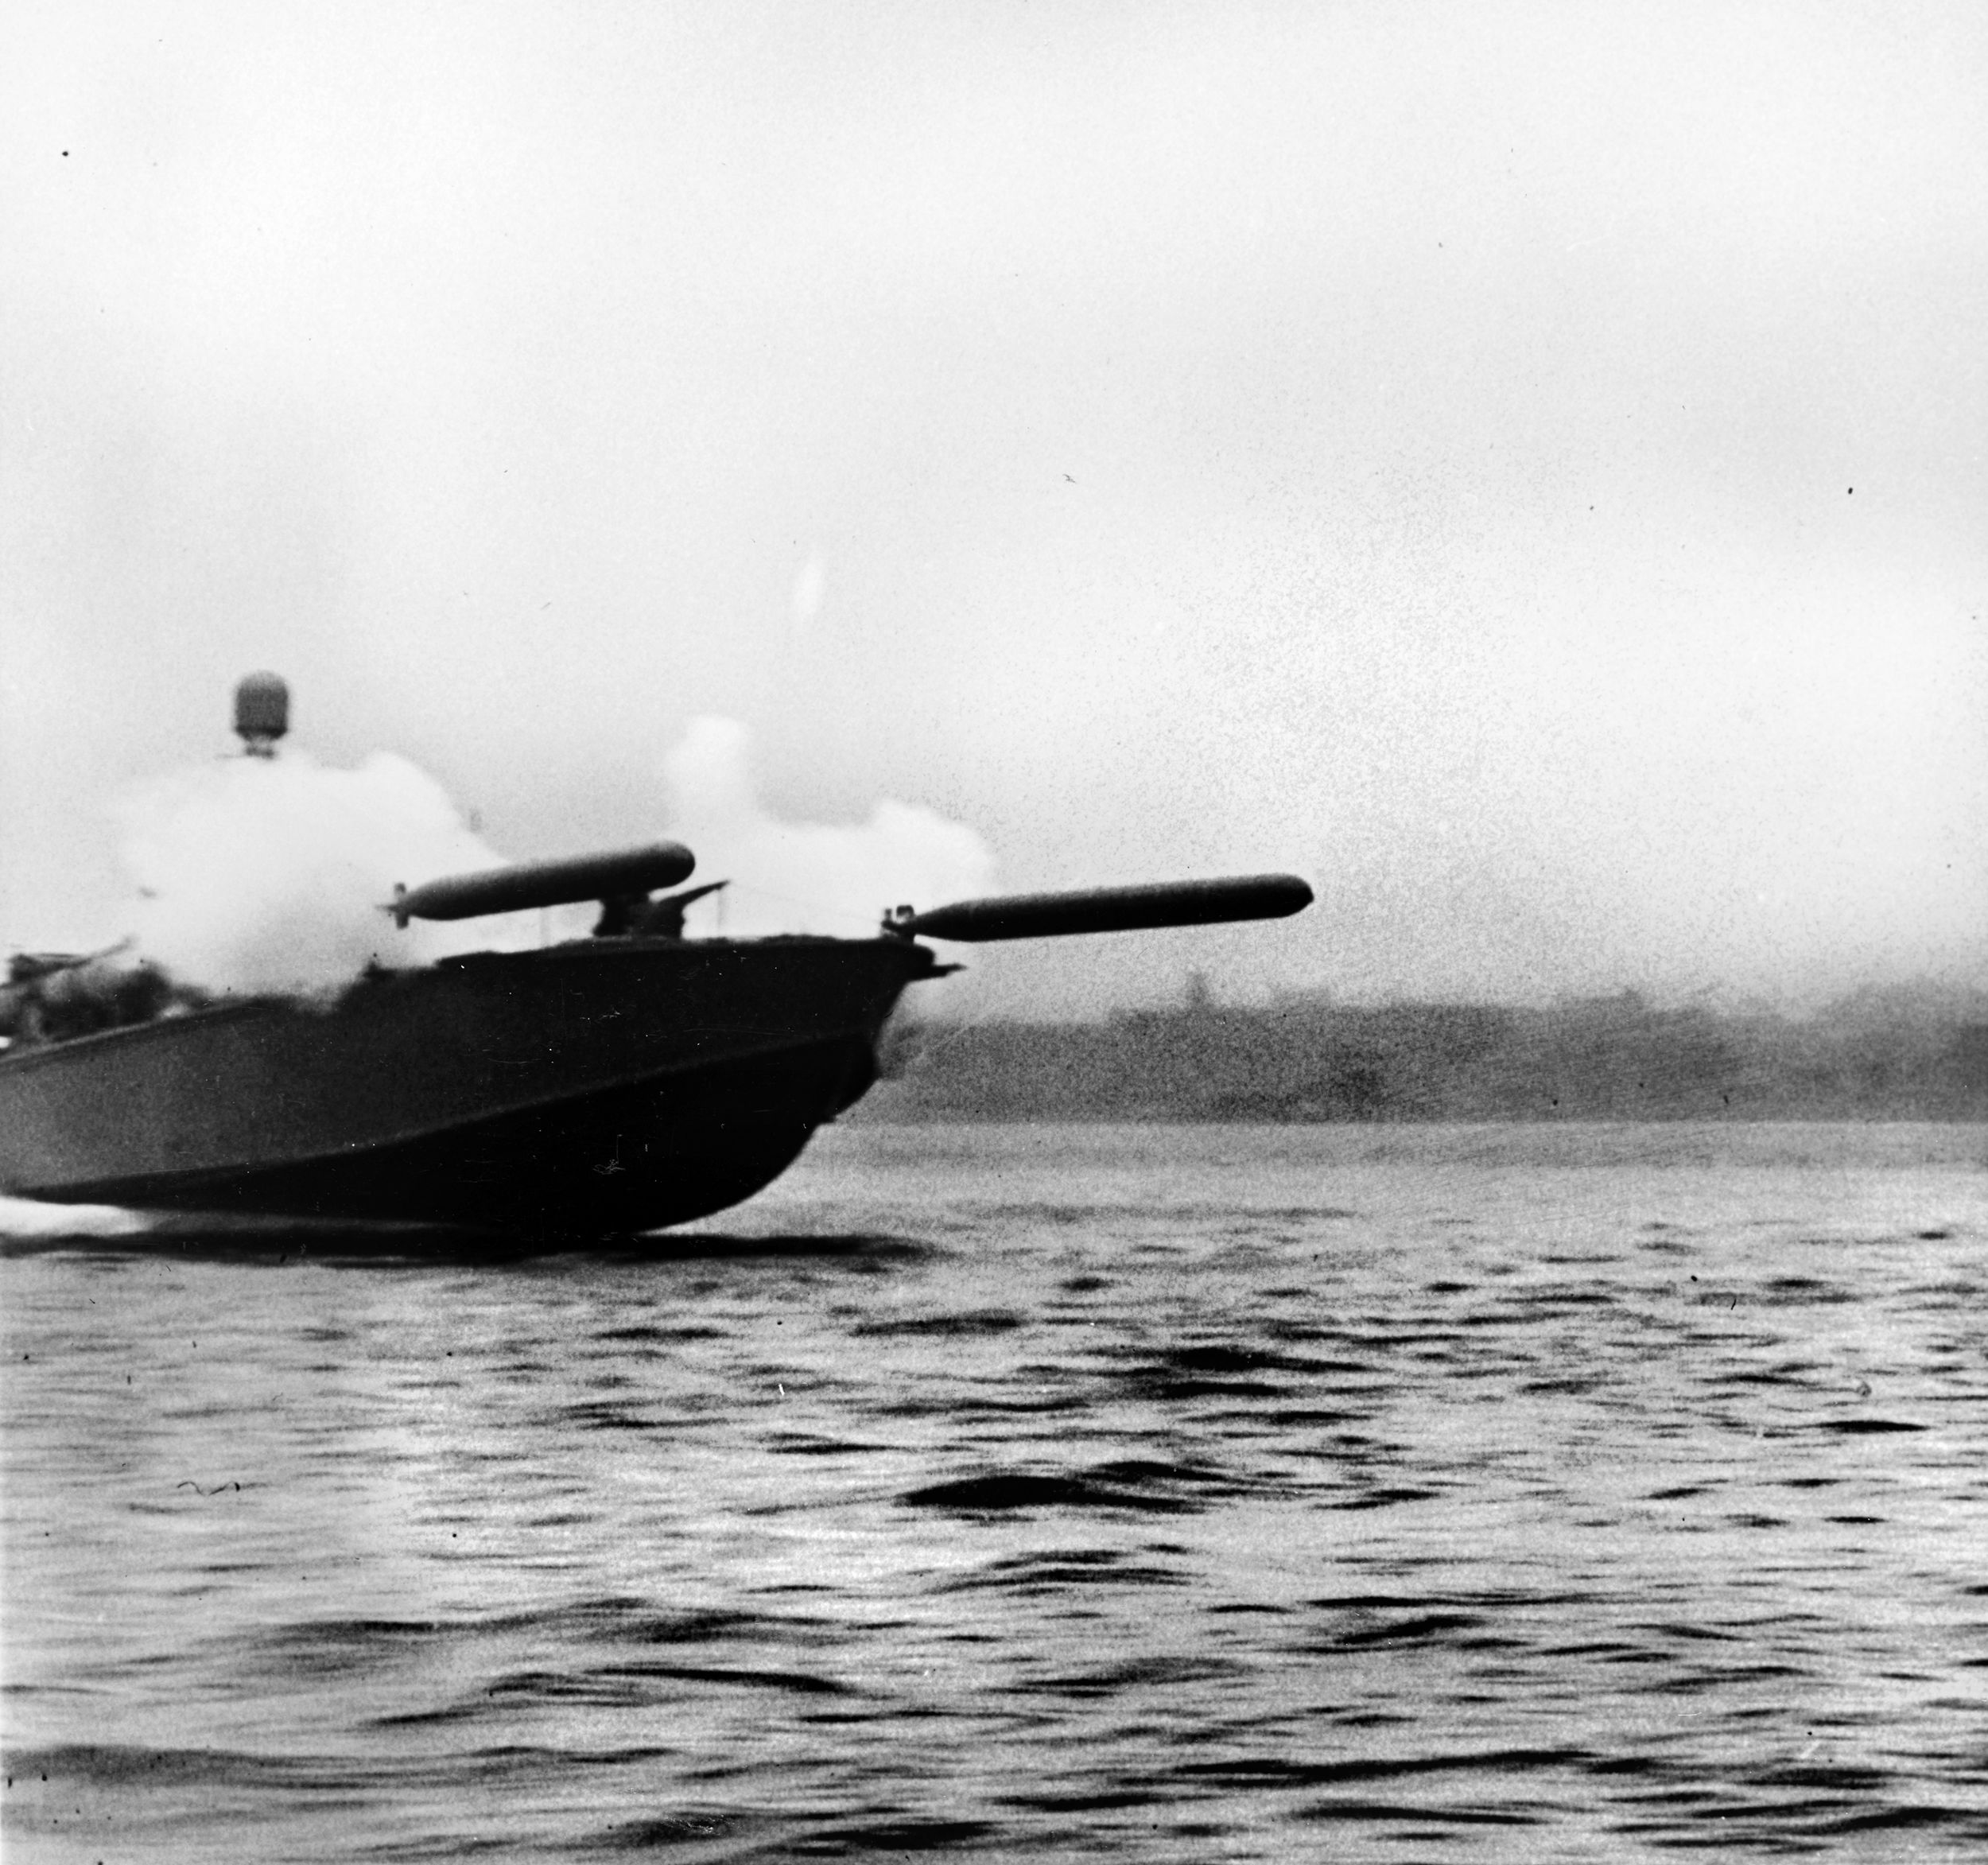 An unidentified U.S. Navy PT boat fires two torpedoes during exercises off the Newport, Rhode Island, torpedo station. The PT boat’s torpedoes are Mk. 8 types, and at the time of the action off Cebu they may have been faulty due to issues that also surfaced with the later Mk. 13.